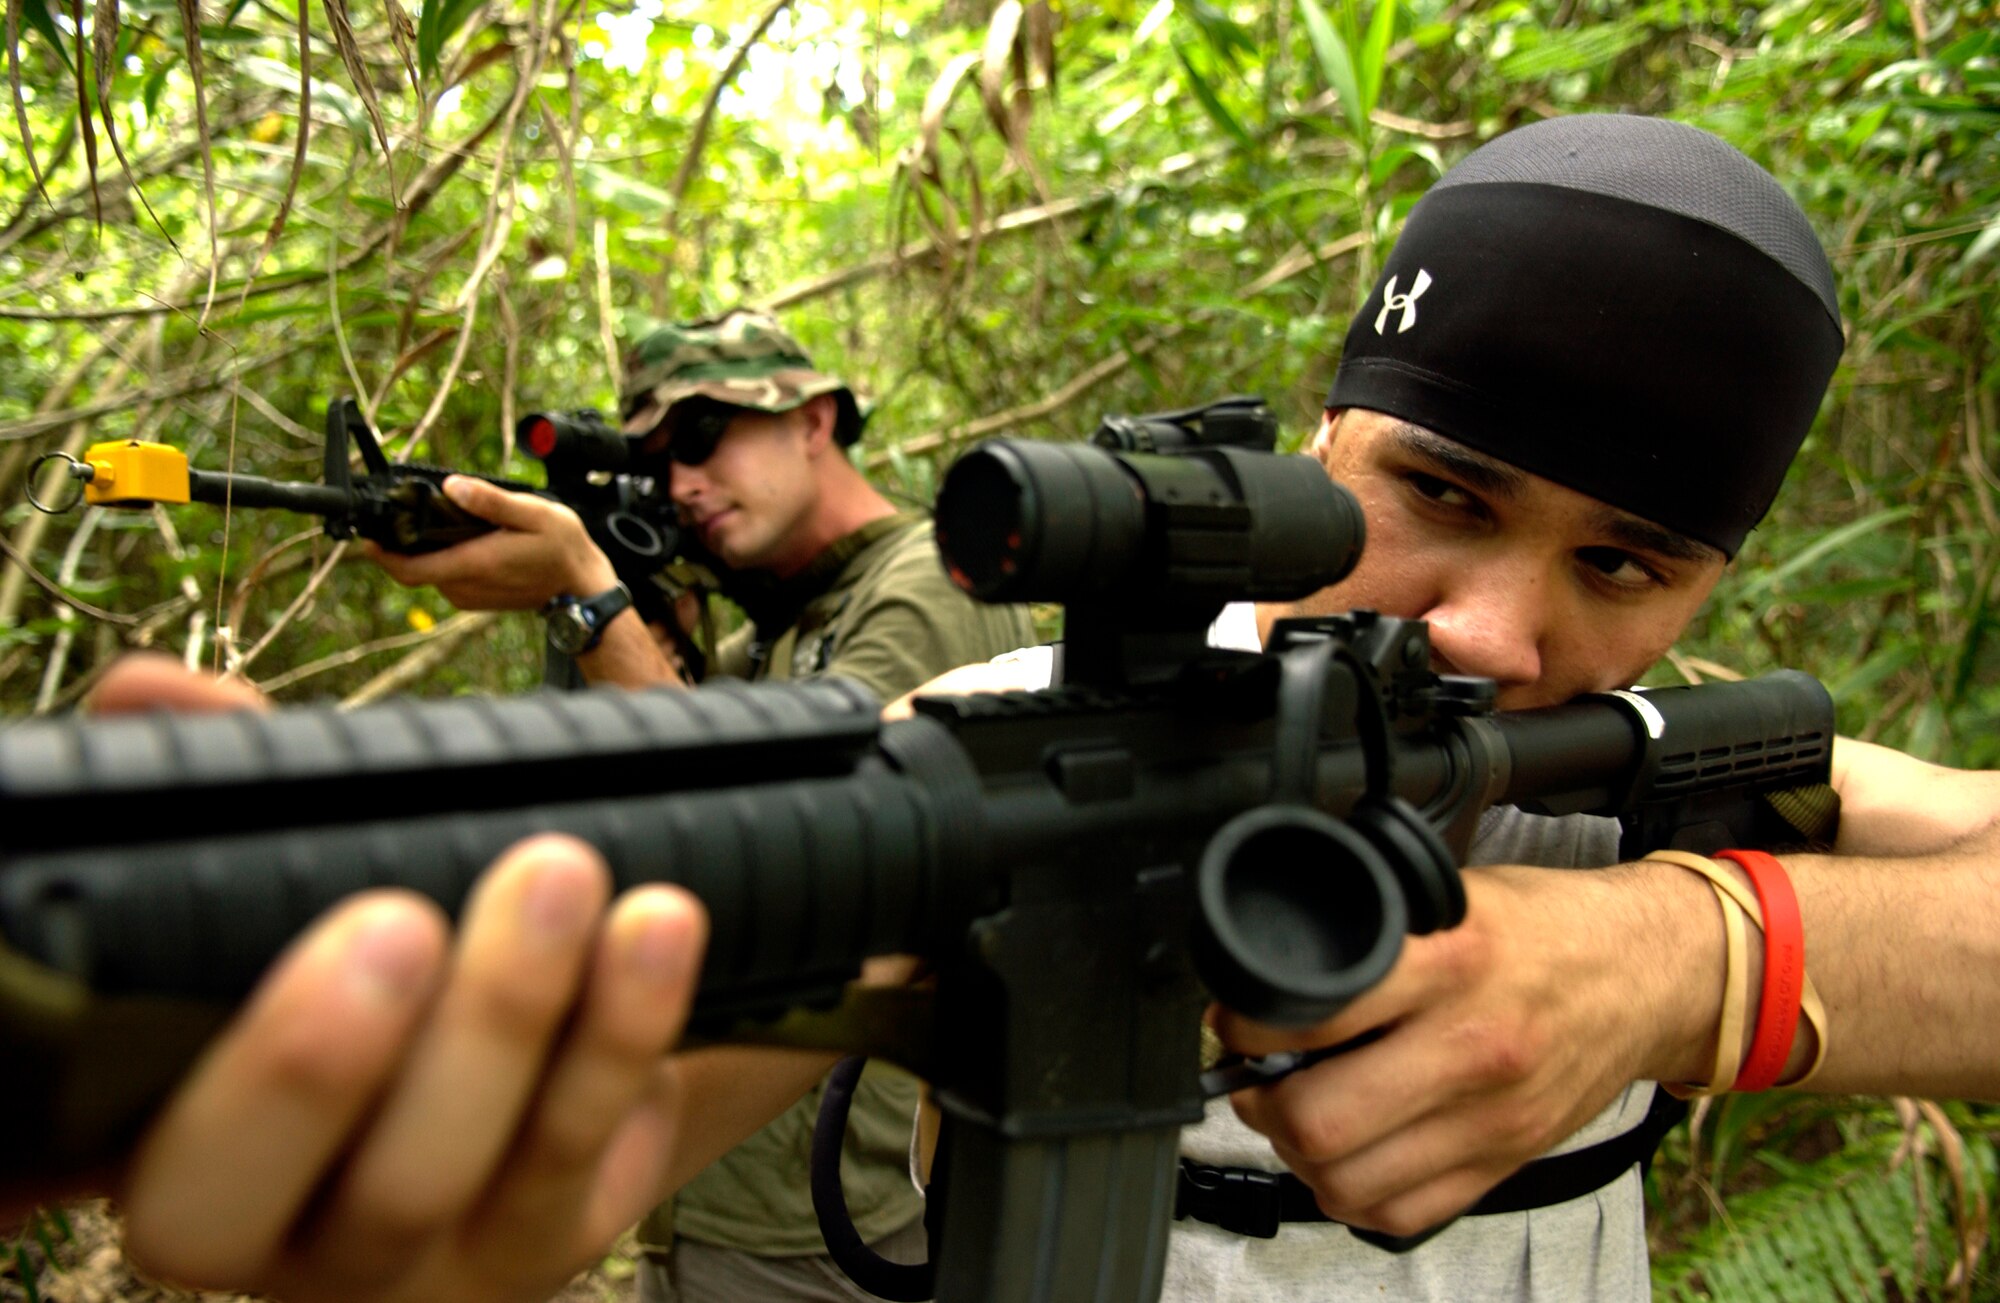 Airman 1st Class Victor DeJesus (foreground) along with Airman 1st Class James Blackwell (background), 36th Civil Engineering Squadron, shoot blanks in the jungles of Andersen South to get the attention of members of the 36th Contingency Response Group during field exercise training June 19. The week long exercise is being held to meet 36th CRG End of Quarter Performance Objectives that include mission analysis and exercising the deployment process. (U.S. Air Force photo/Senior Airman Miranda Moorer)                            